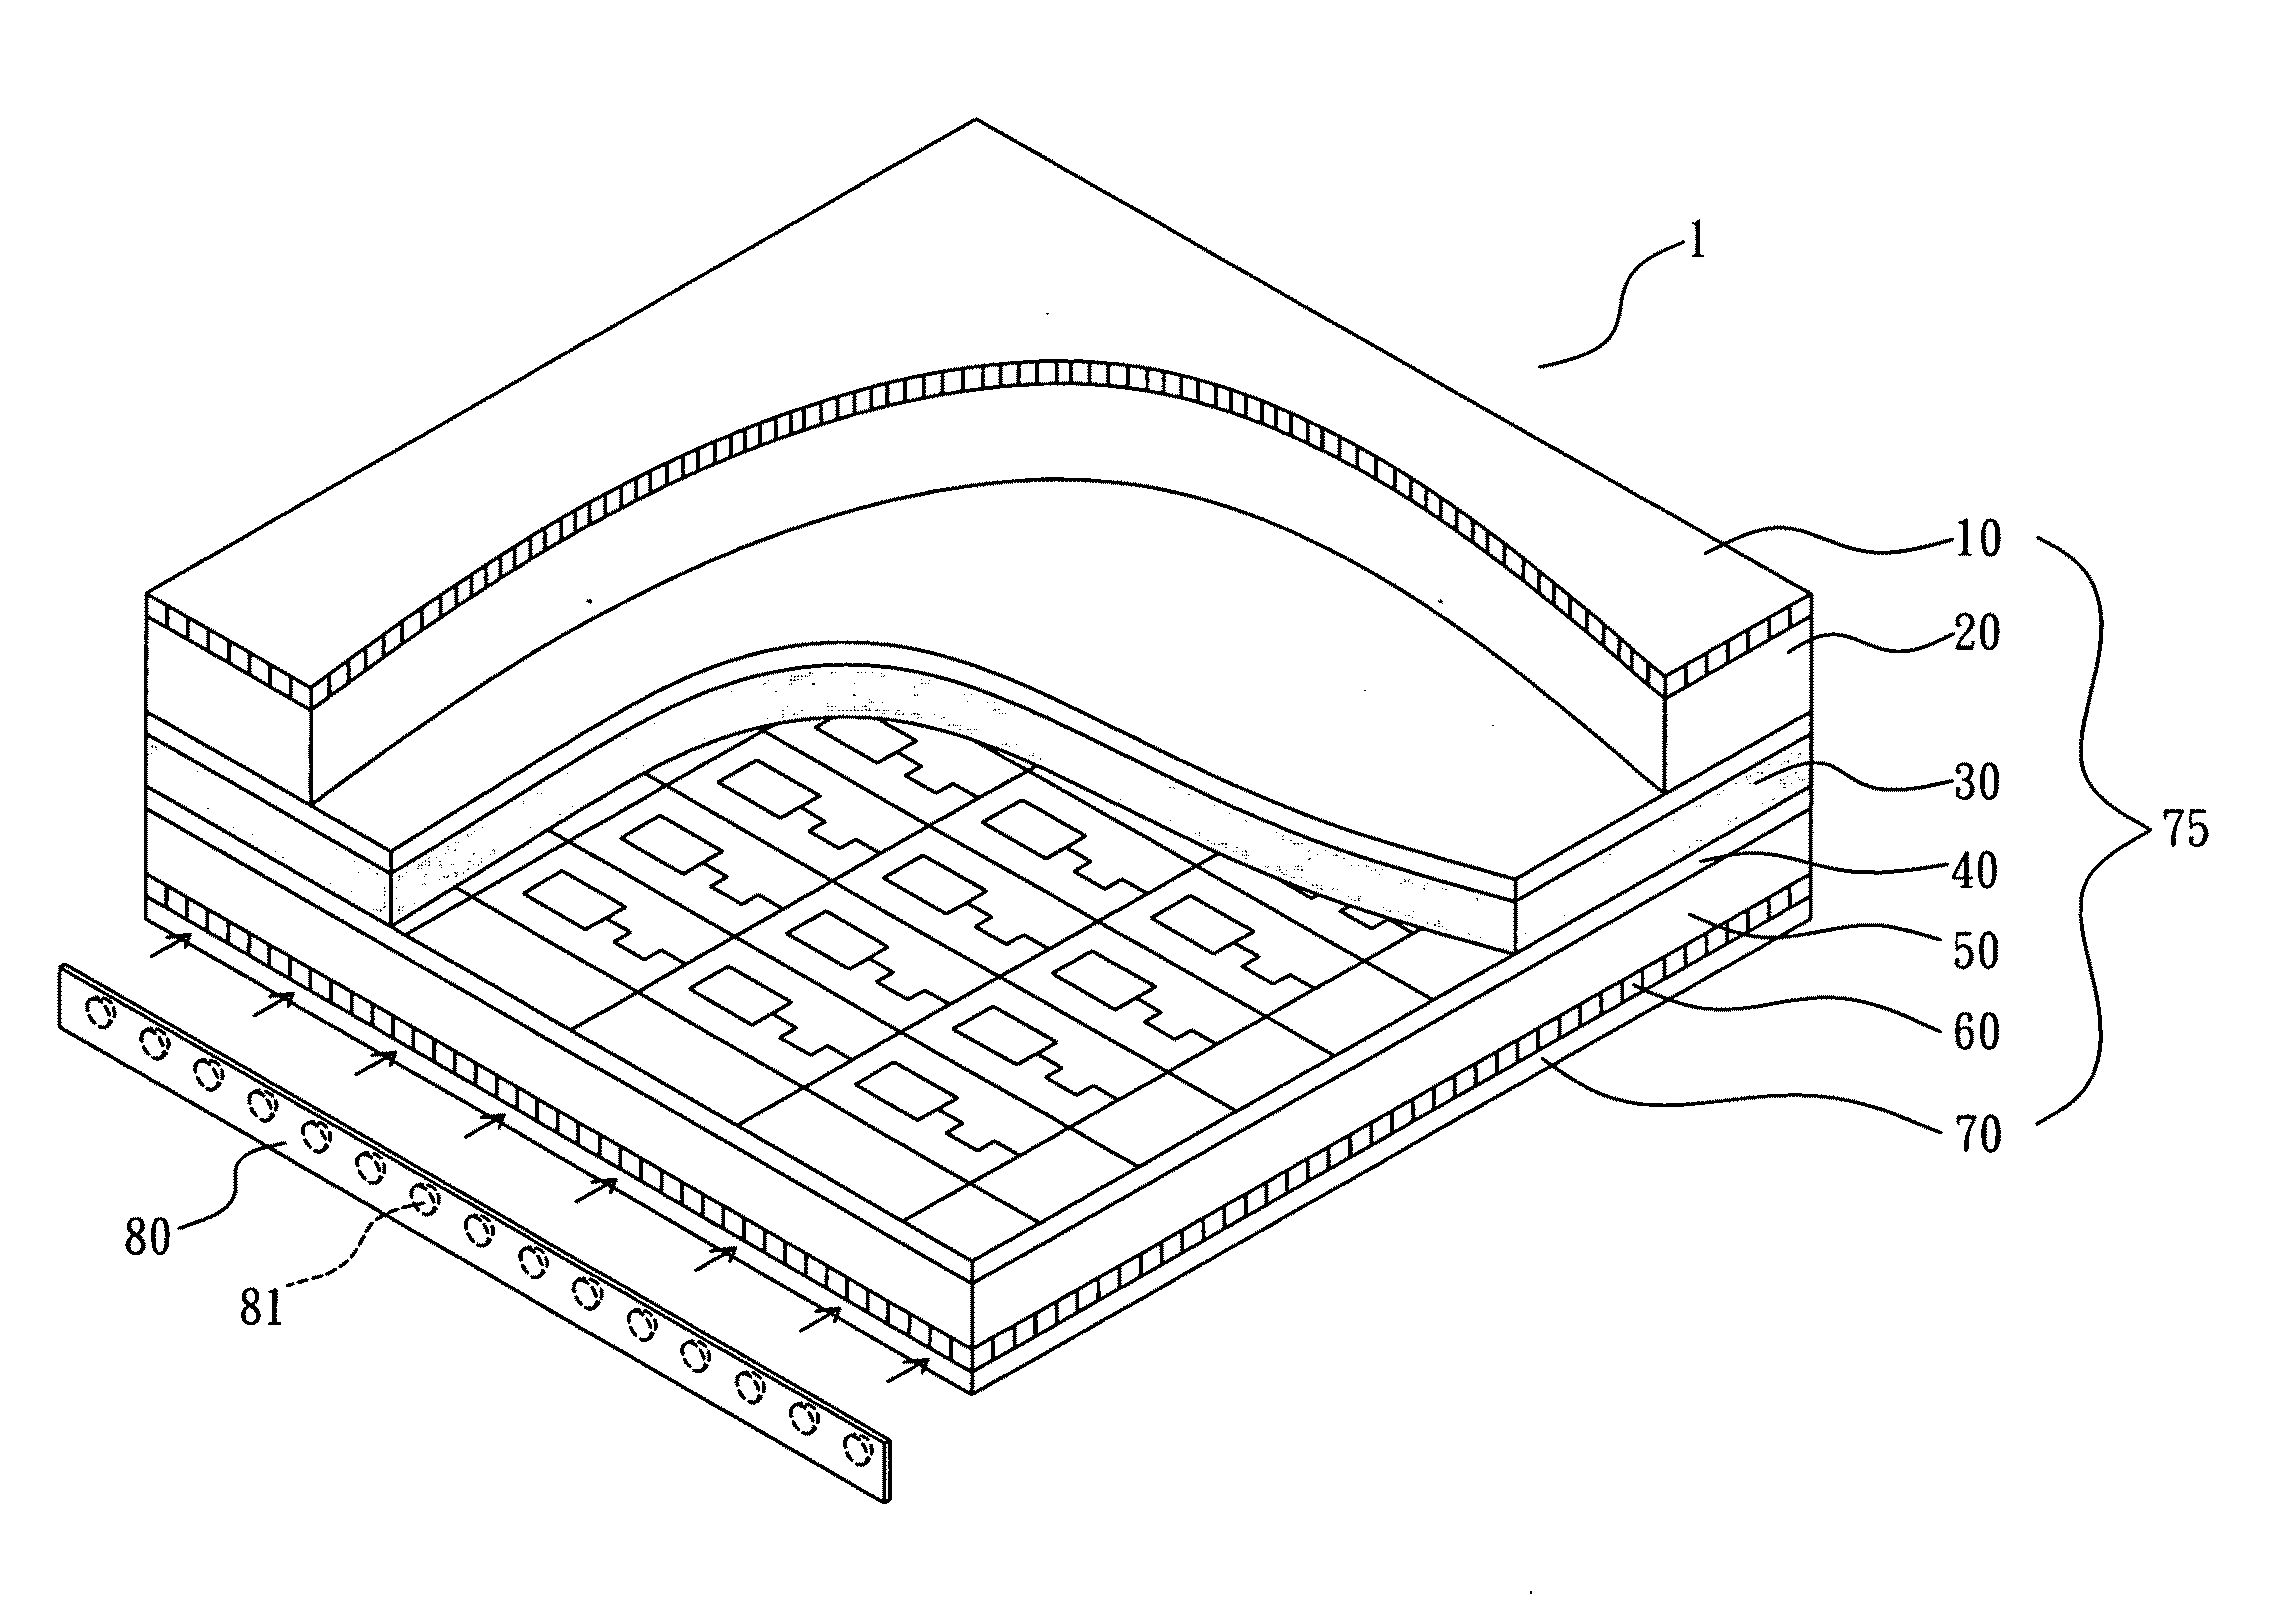 Display system with LED backlight means